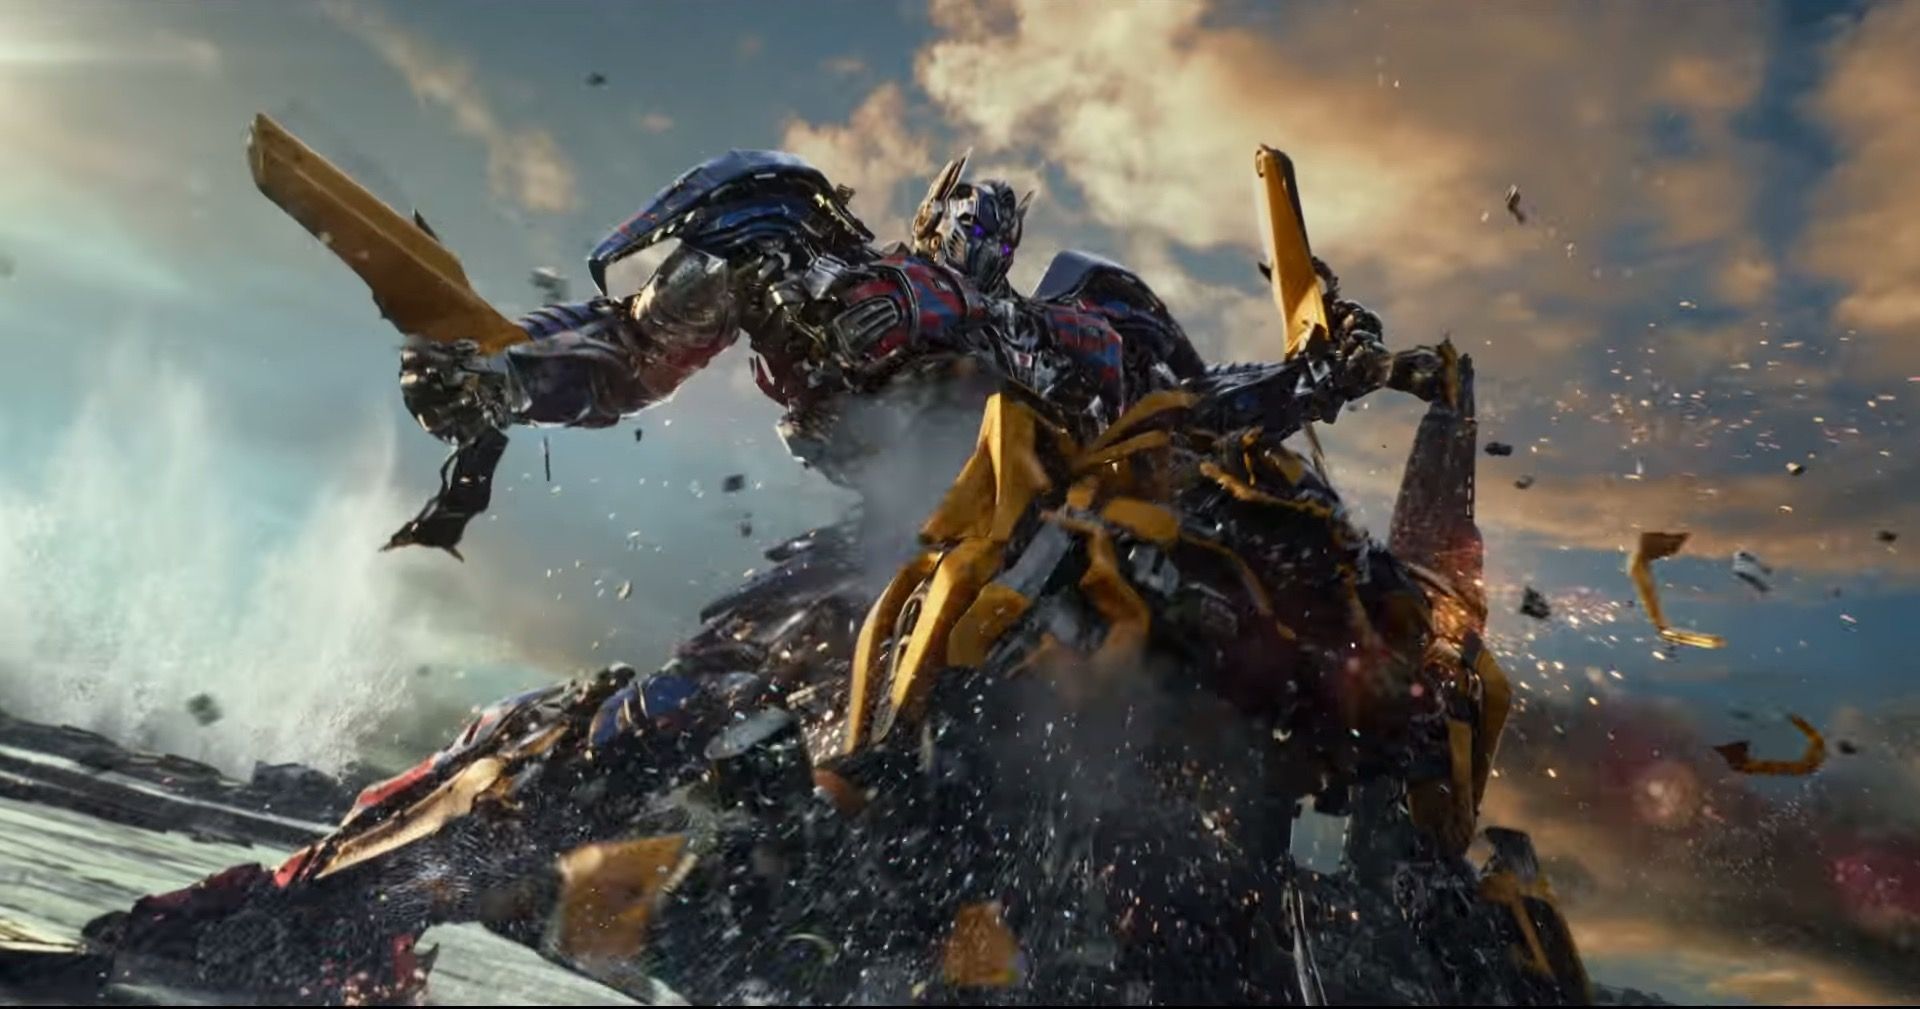 fifth transformers movie